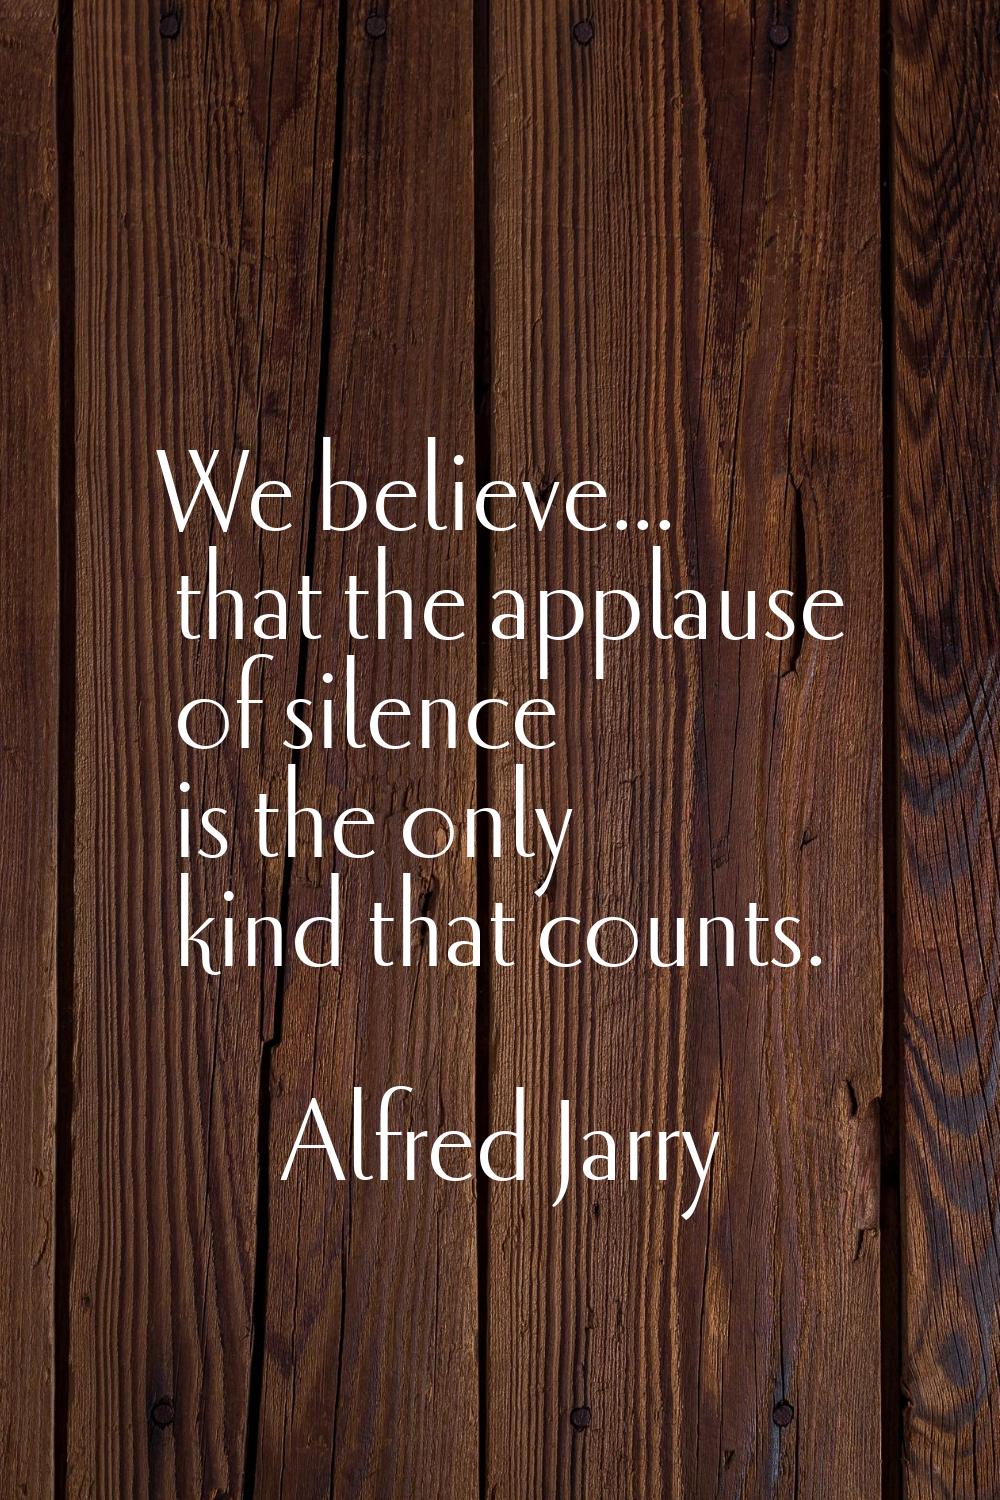 We believe... that the applause of silence is the only kind that counts.